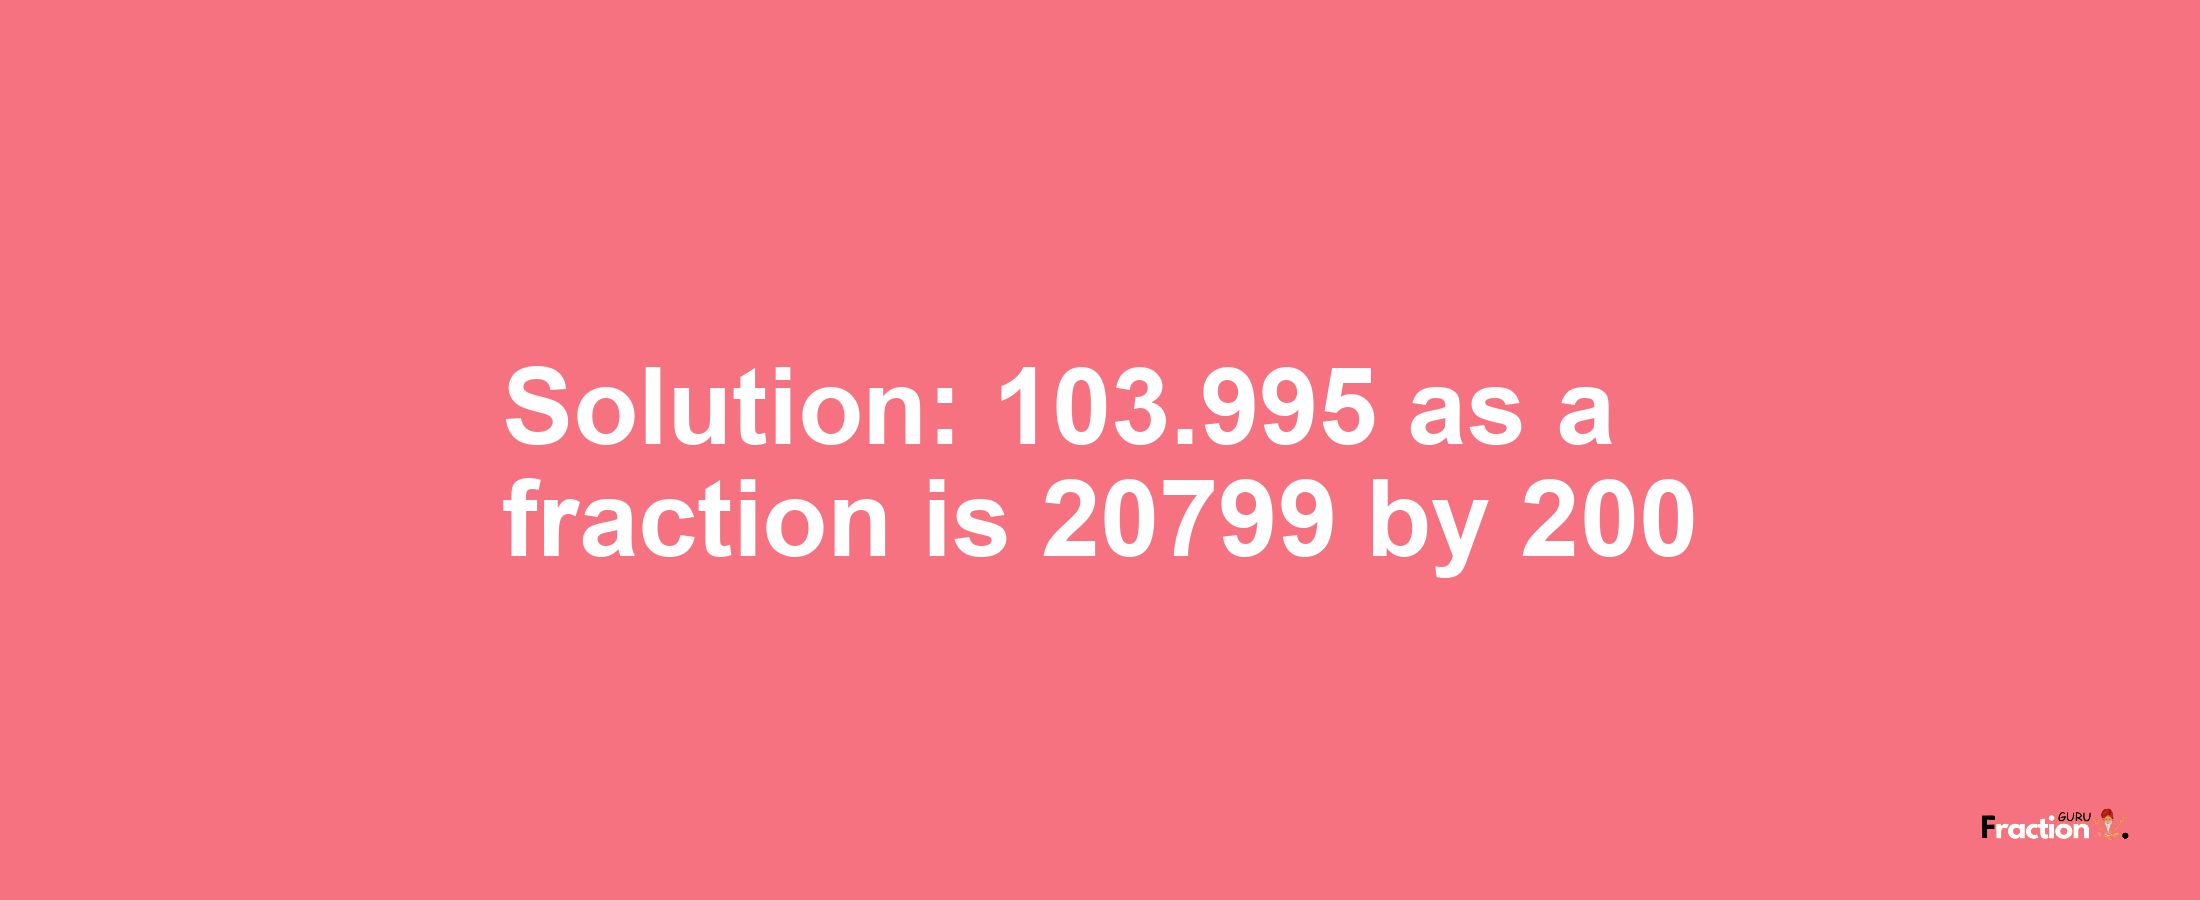 Solution:103.995 as a fraction is 20799/200